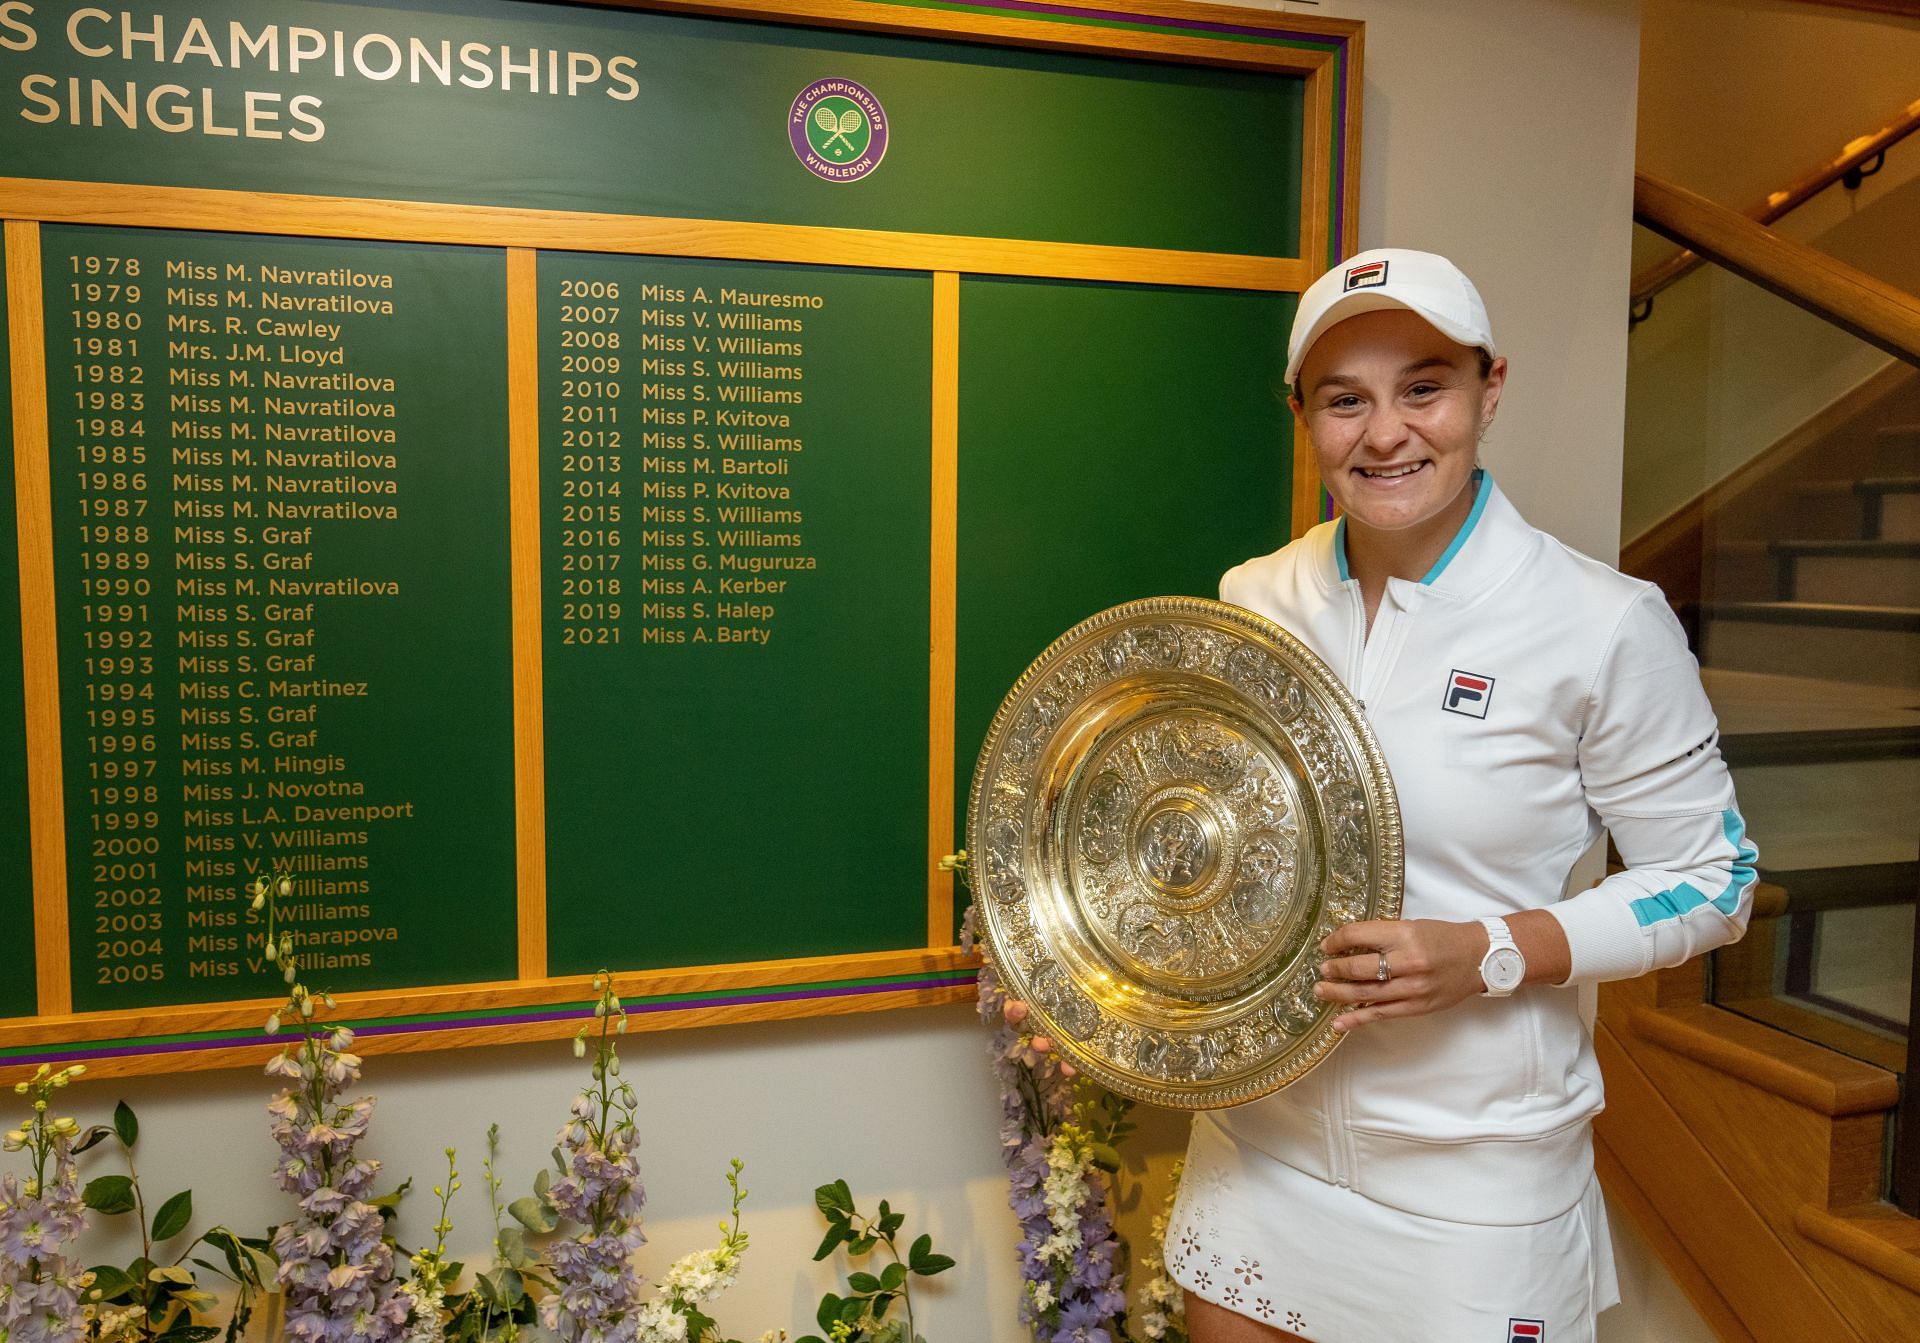 Ashleigh Barty won her second Grand Slam title at Wimbledon in 2021